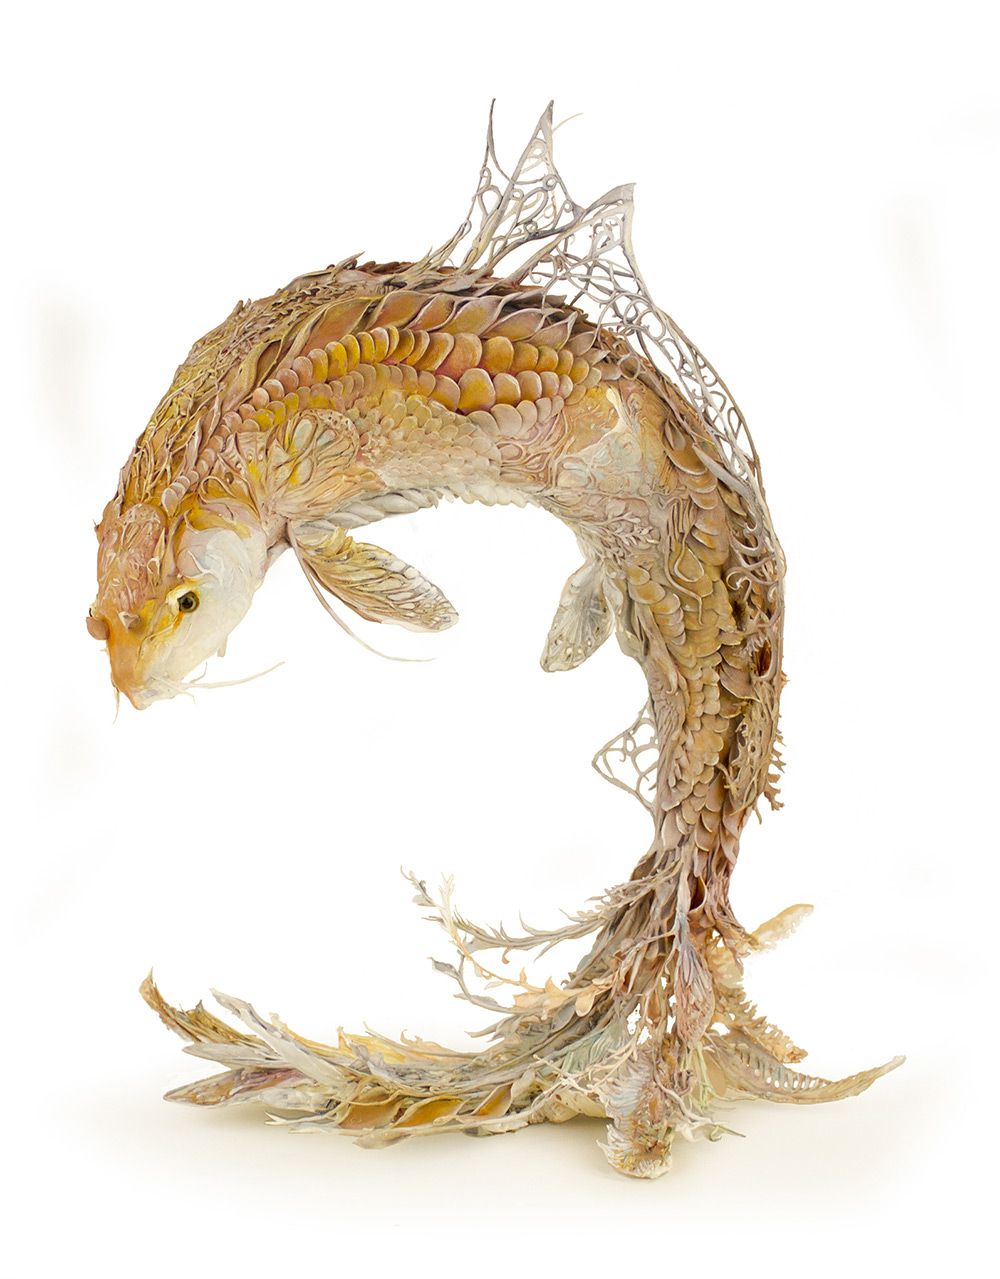 Lush And Surreal Sculptures Of Symbiotic Animals By Ellen Jewett 26